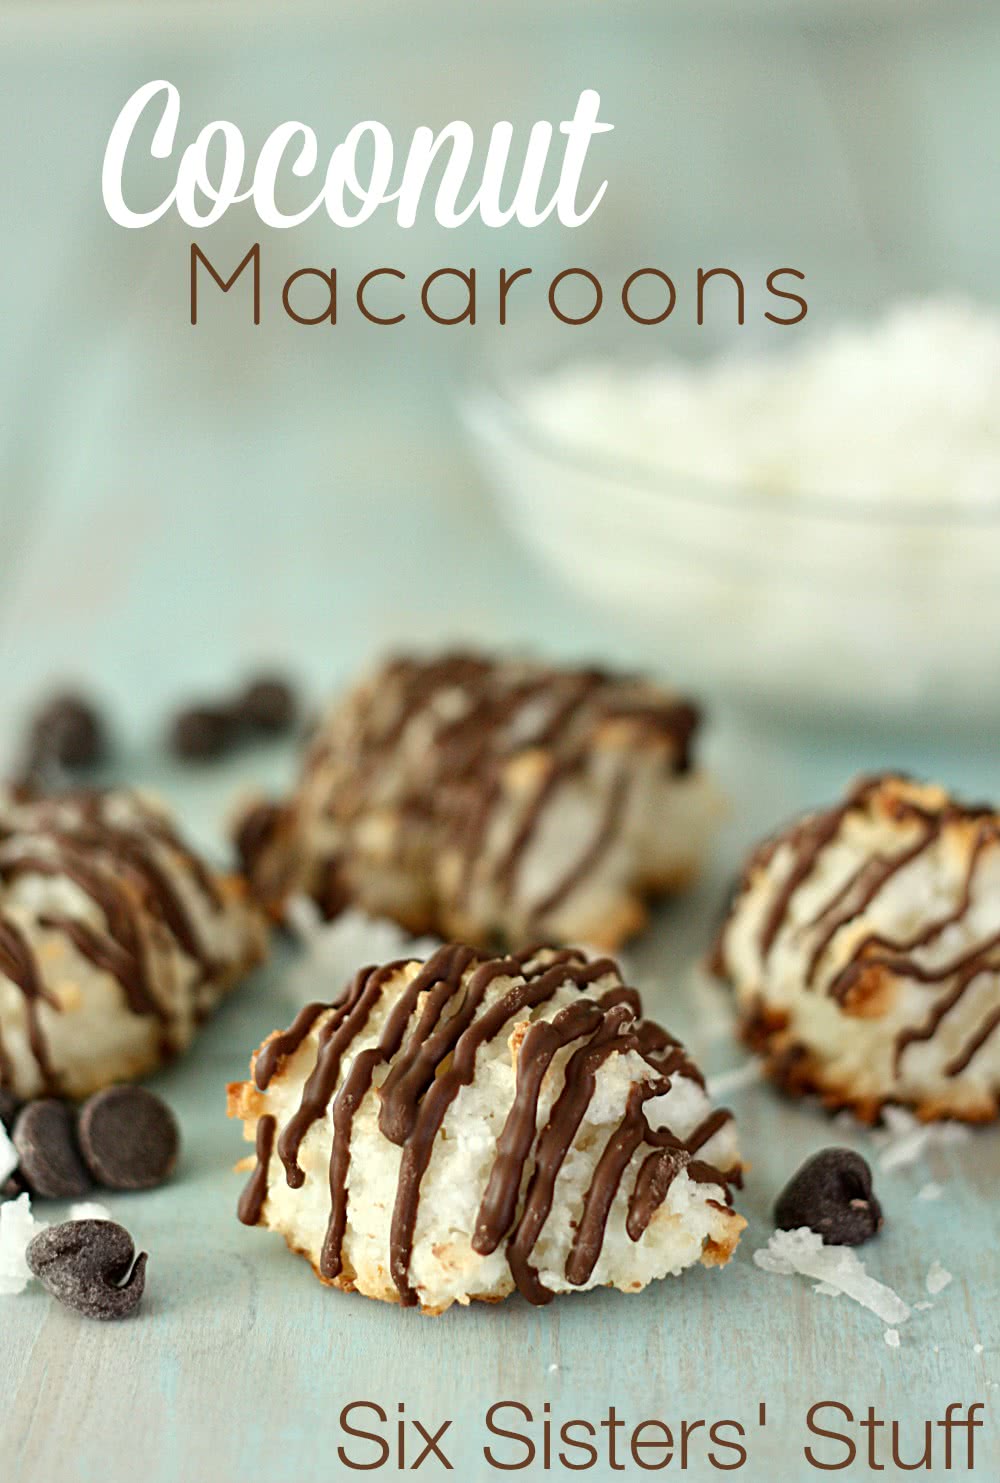 Coconut Macaroons with Chocolate Drizzle Recipe